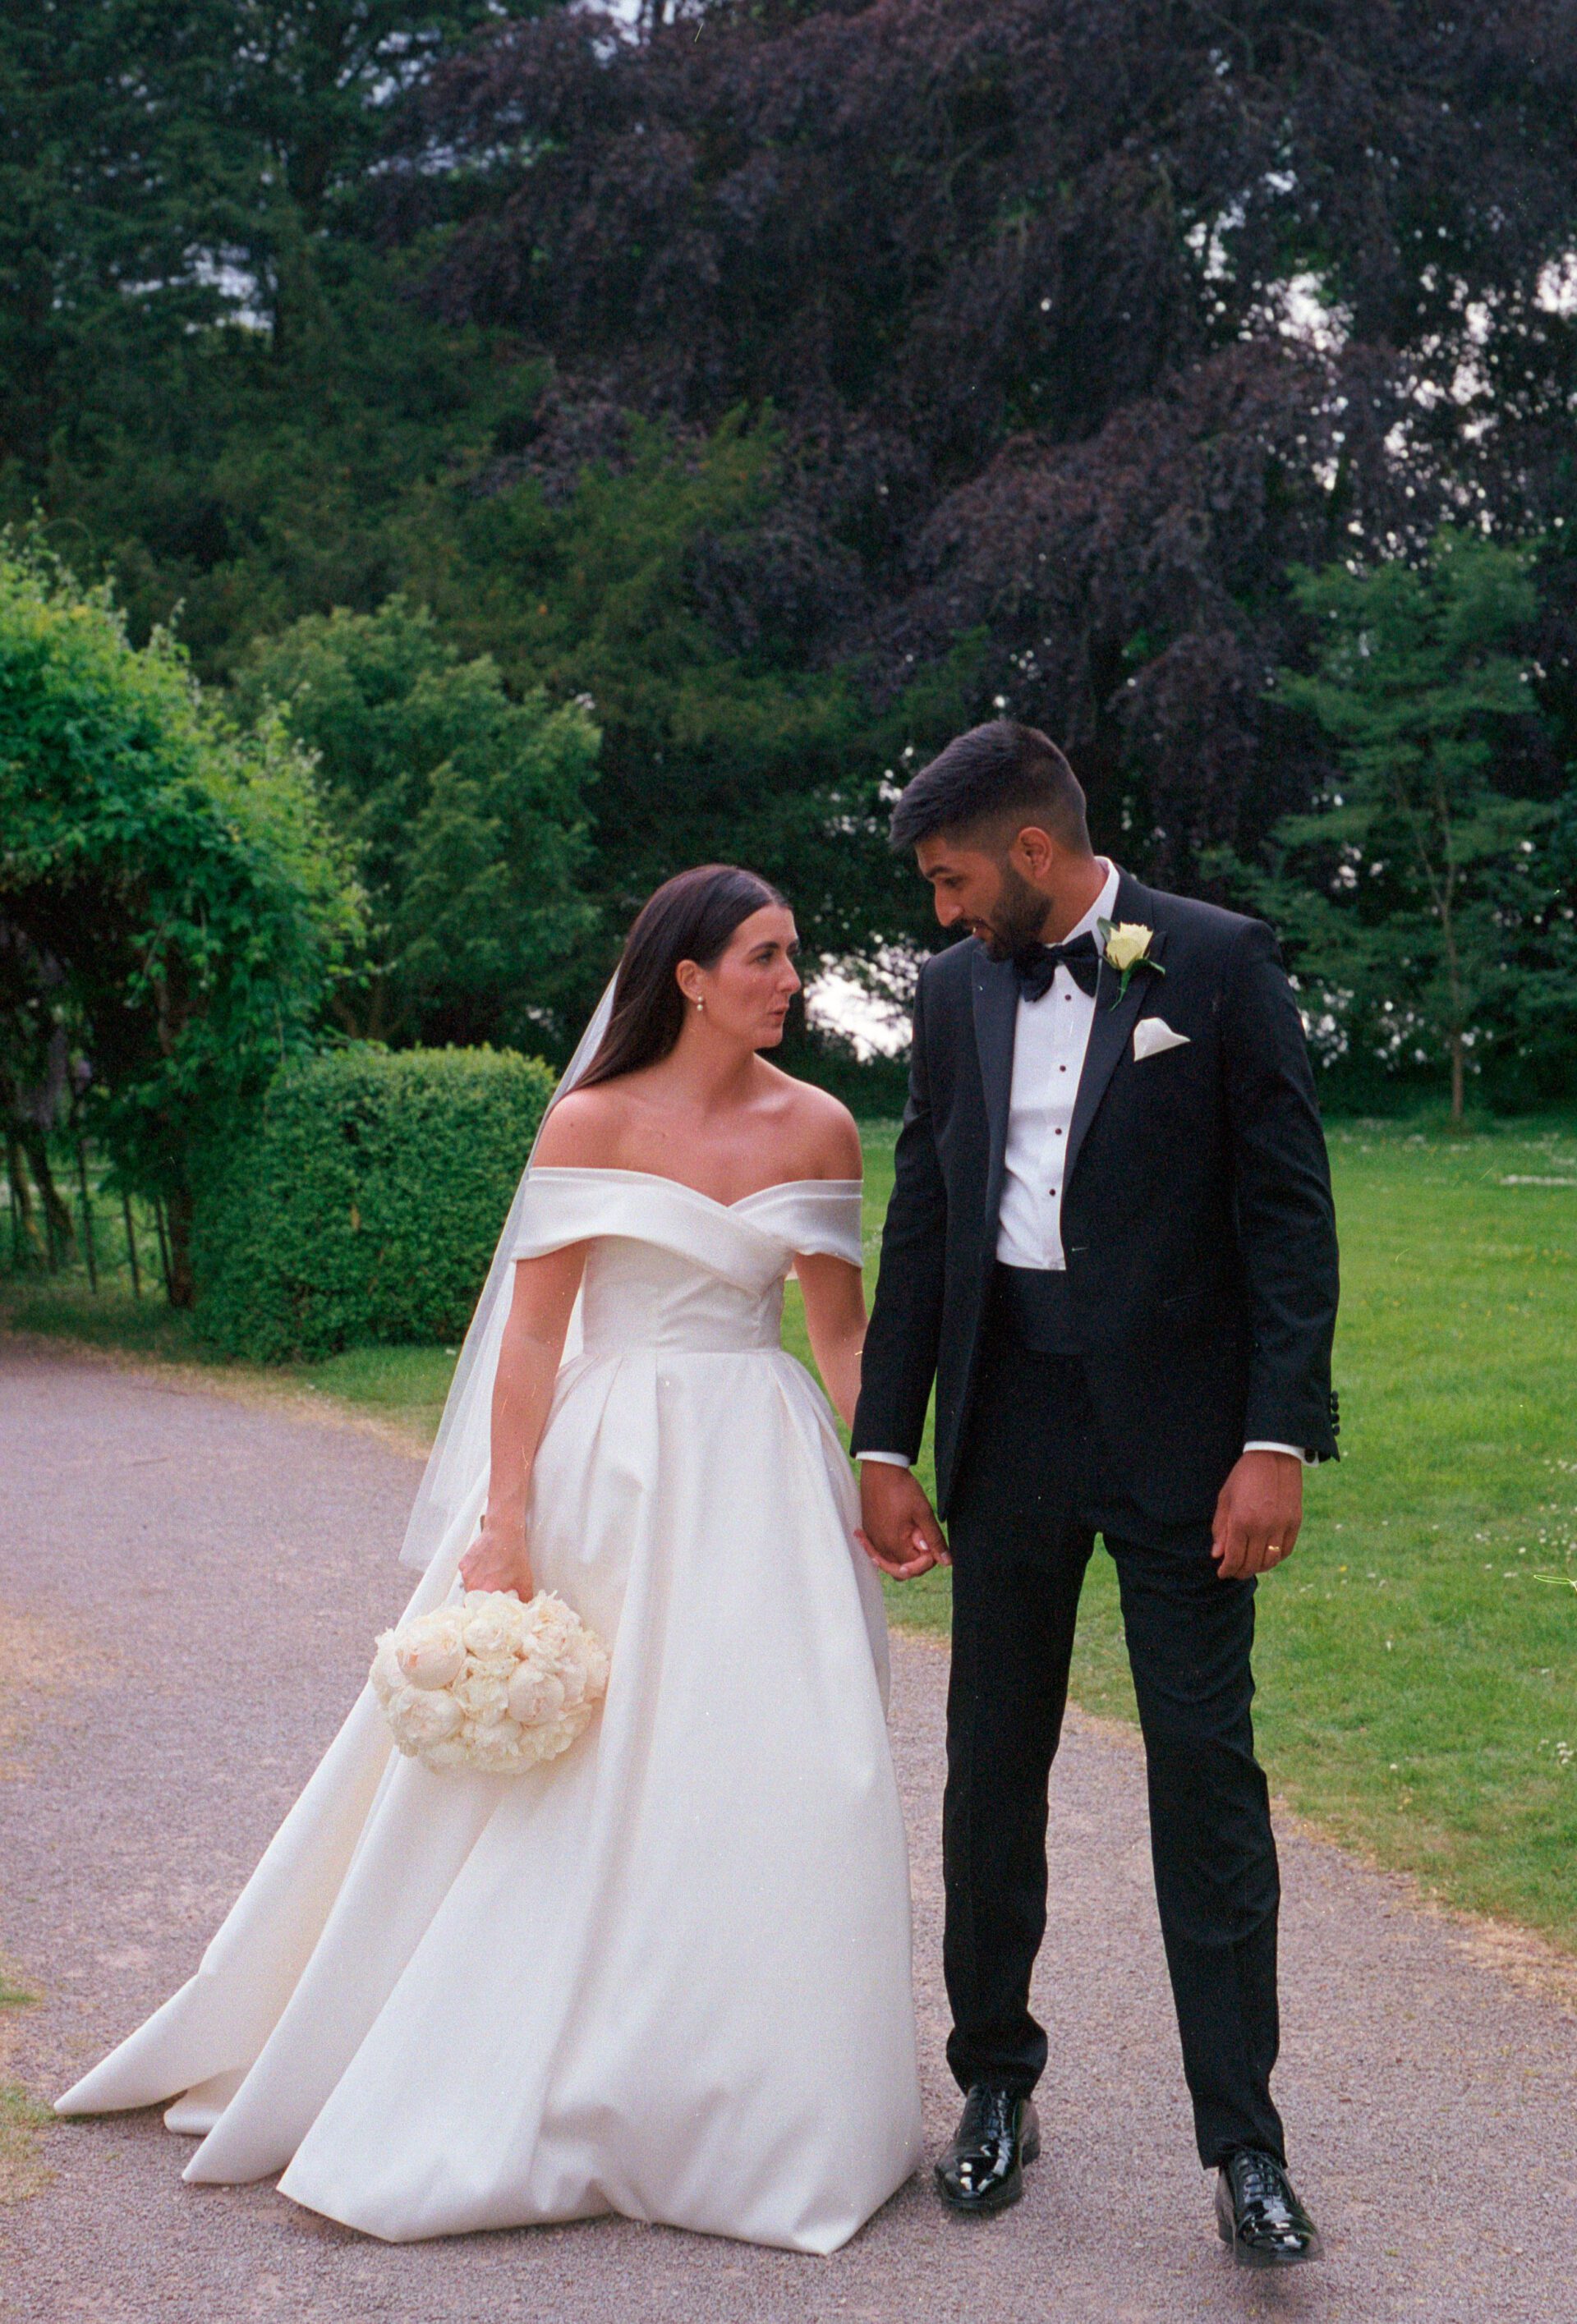 Couples portraits captured on 35mm at Tortworth Court